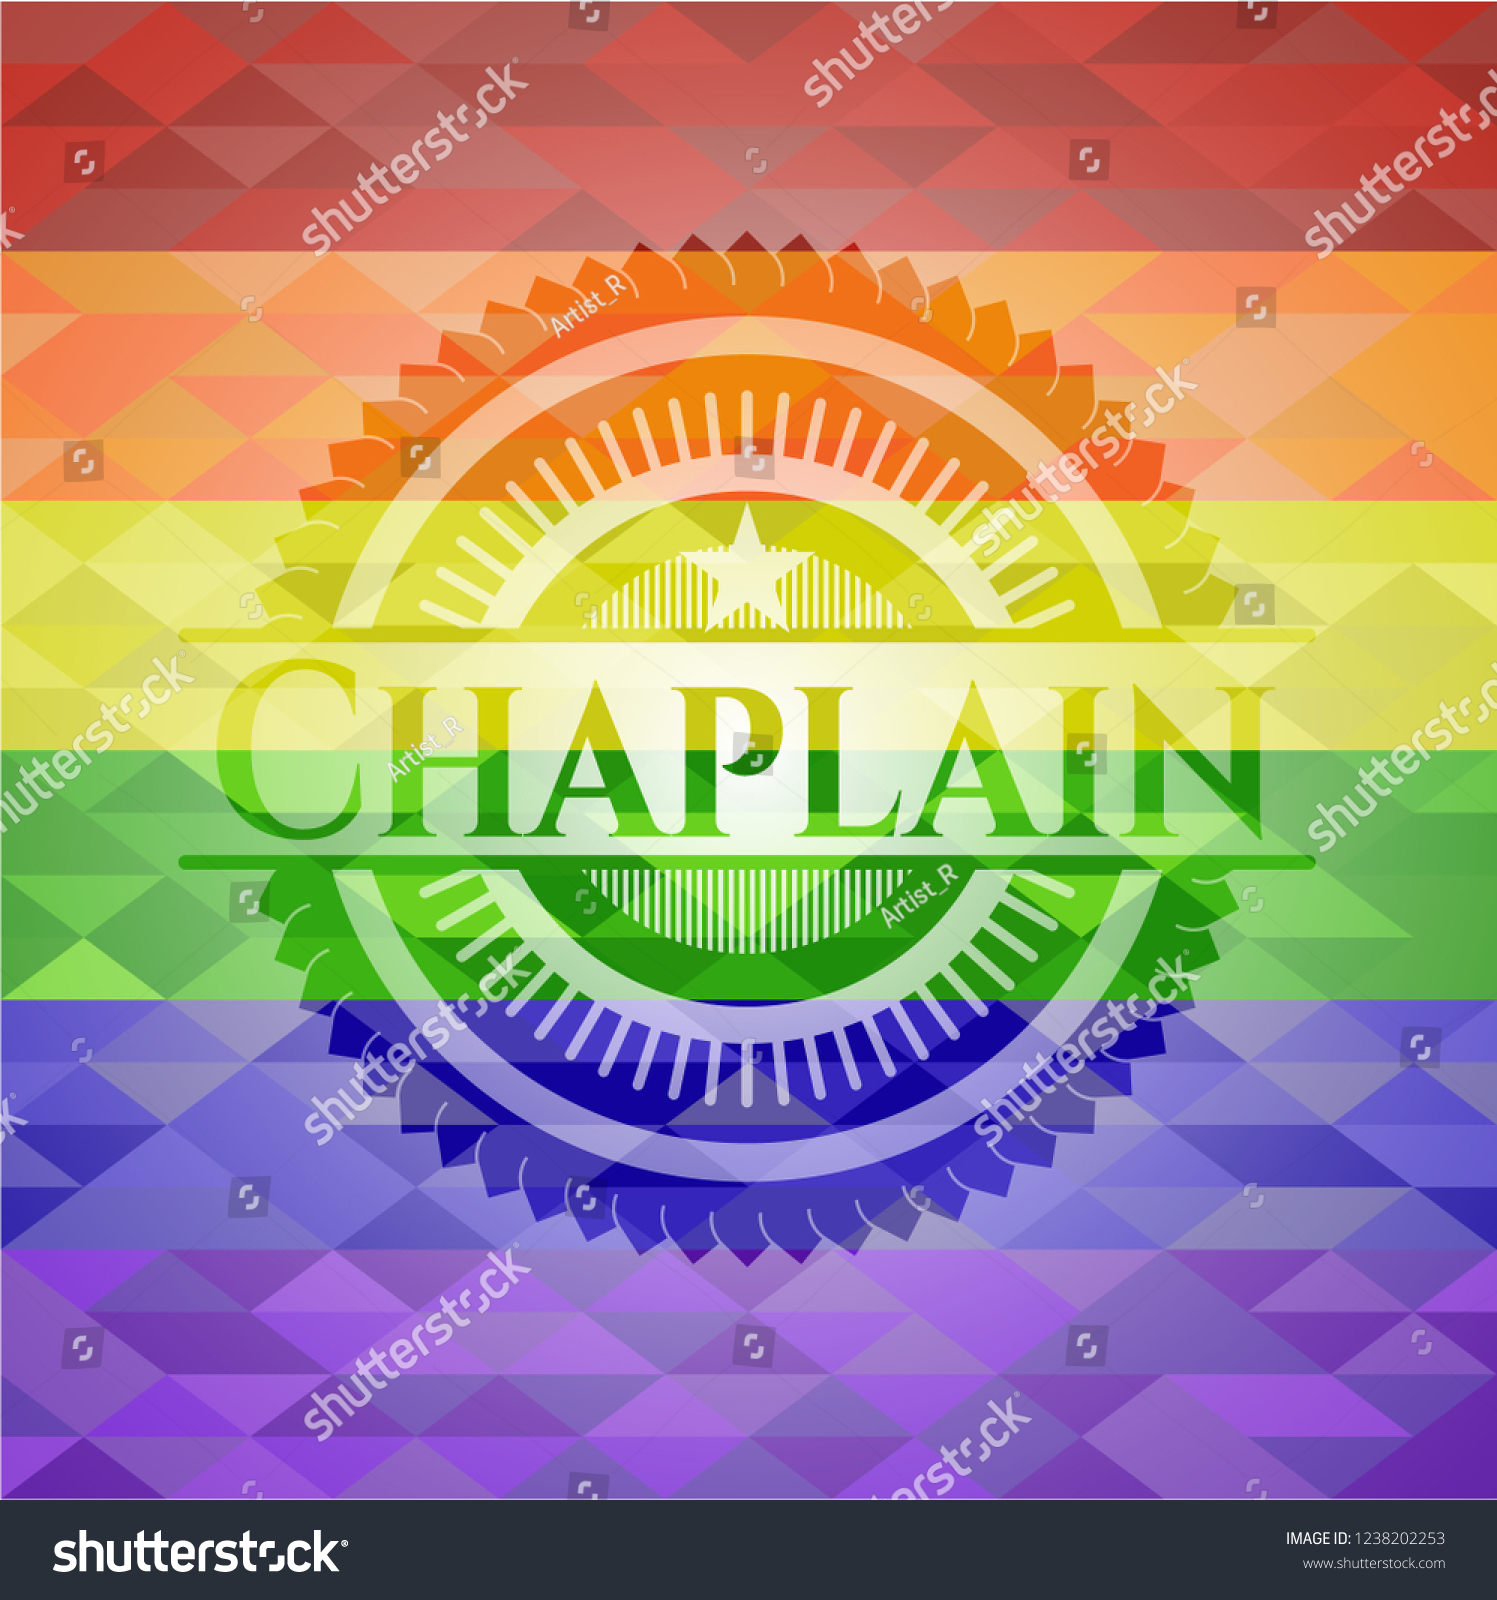 Chaplain On Mosaic Background Colors Lgbt Stock Vector Royalty